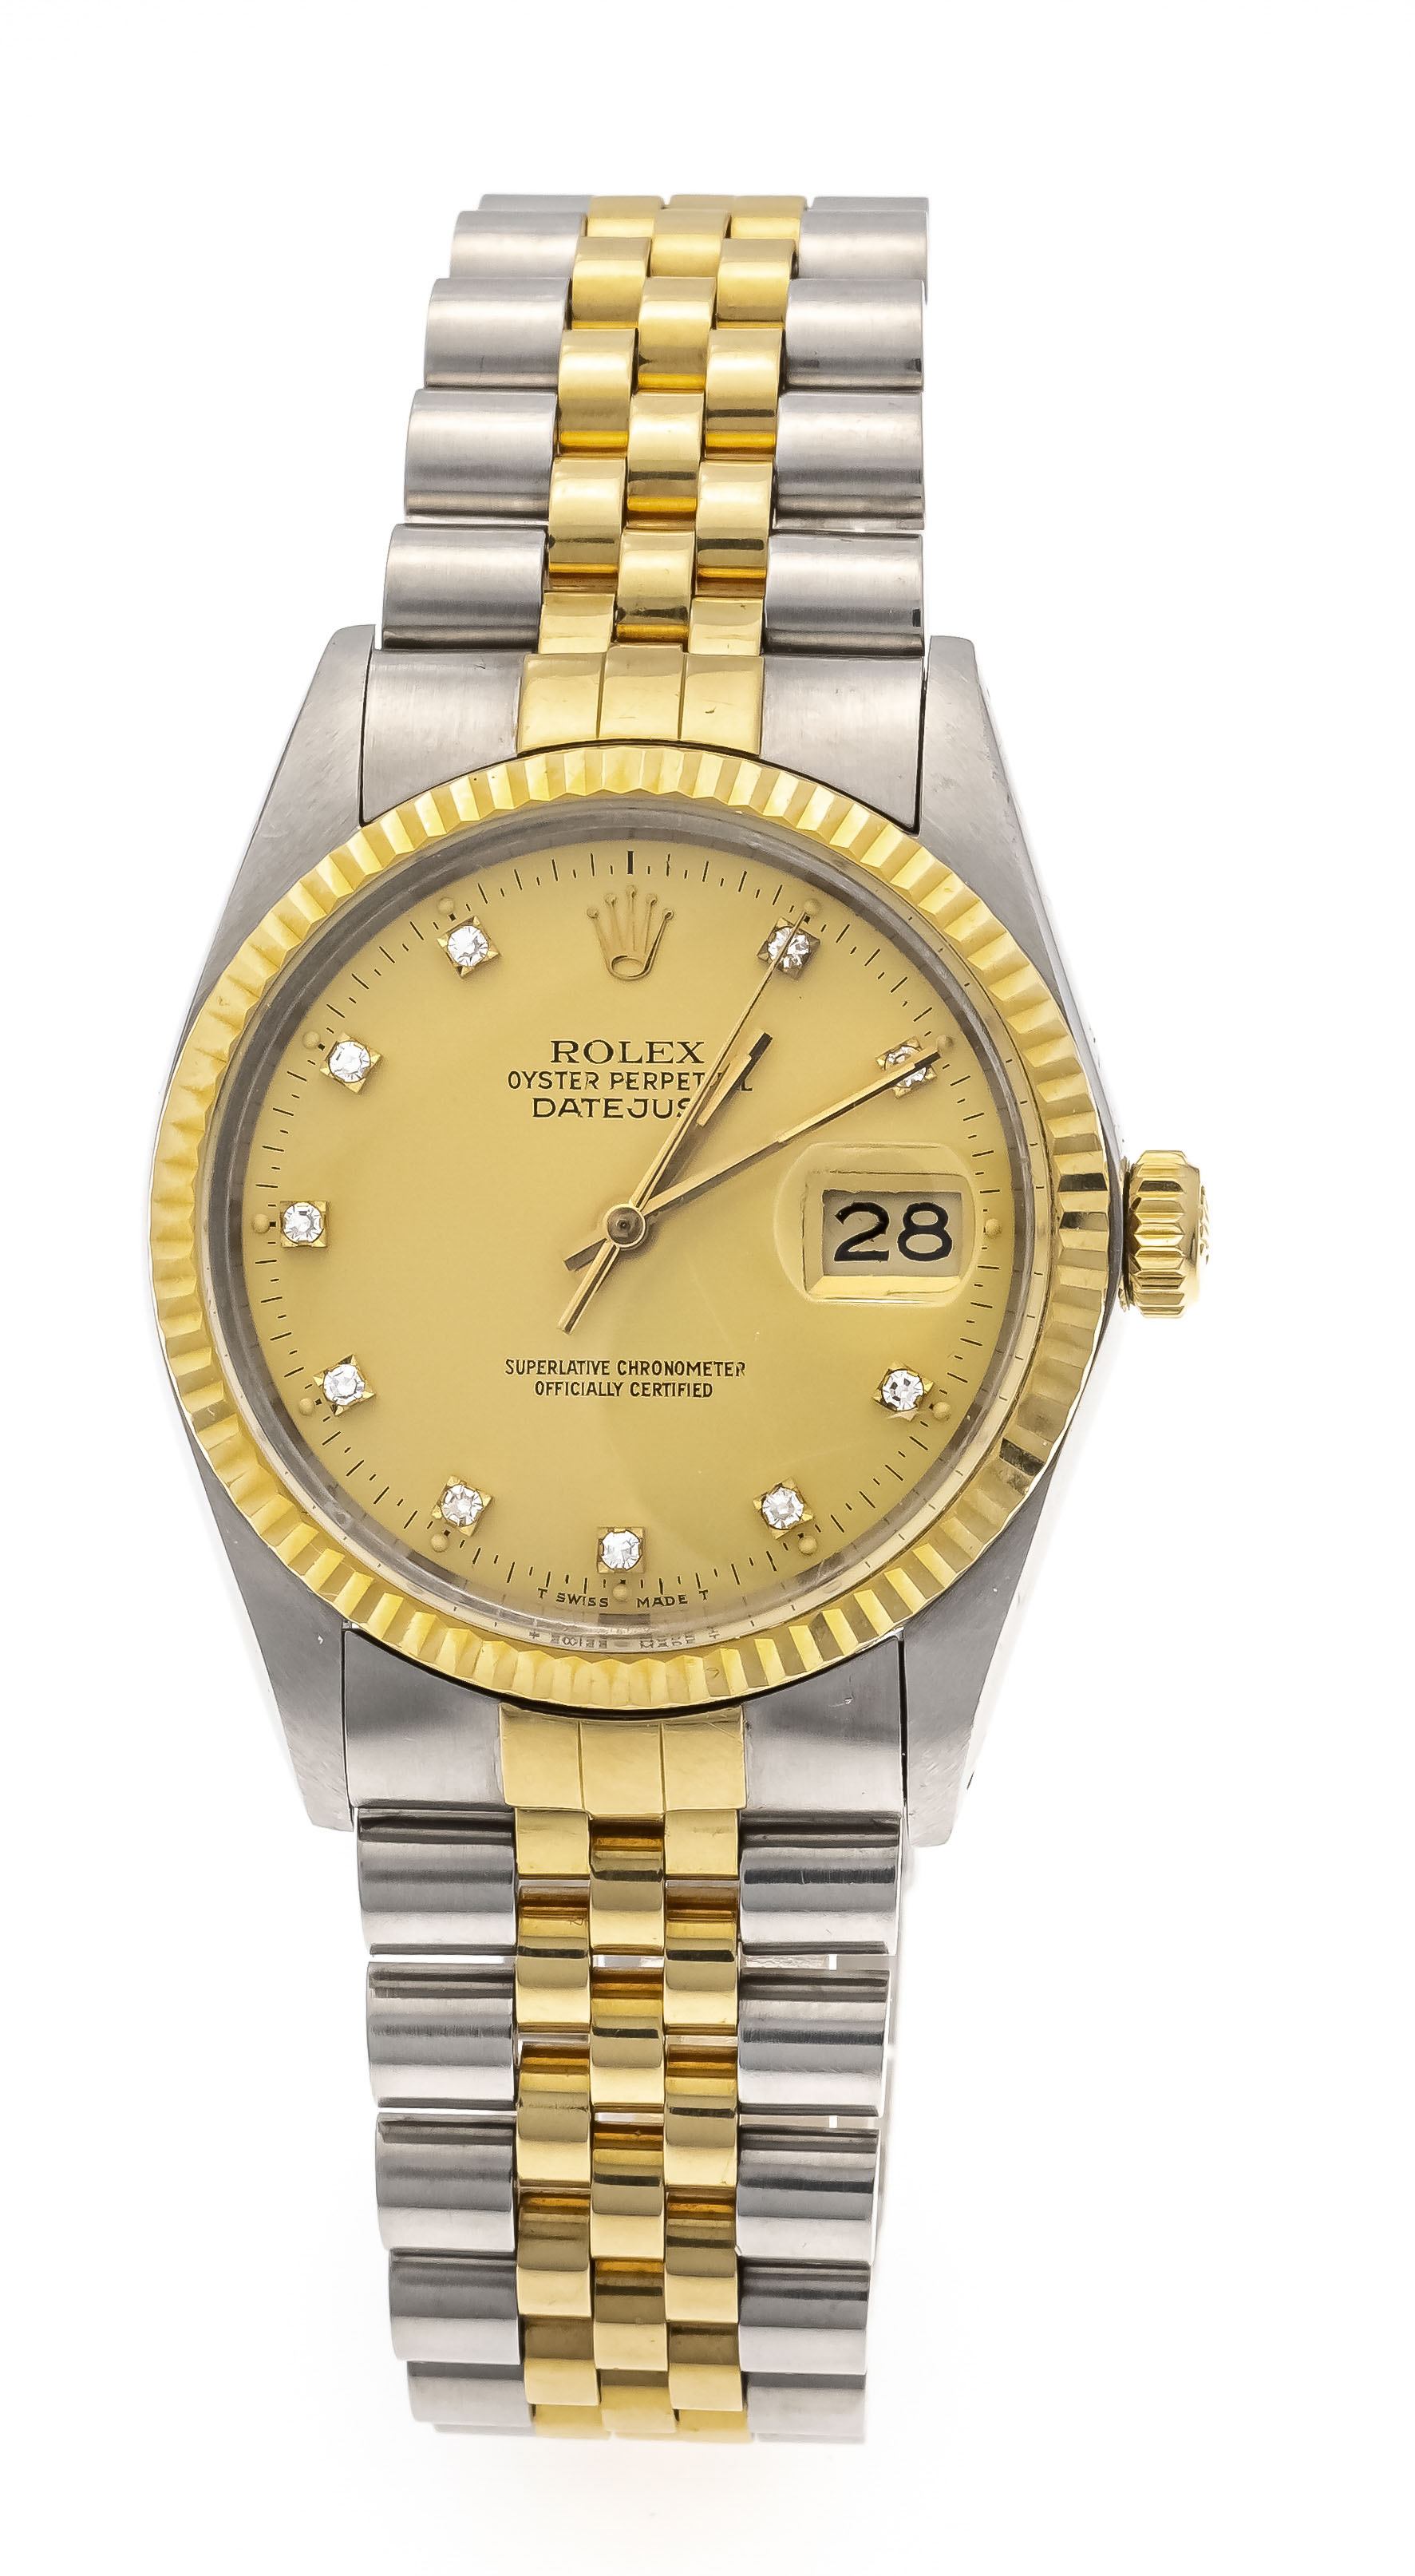 Rolex Oyster Perpetuel, Chronometer, men's watch steel/gold, Ref. 16013, from 1986, gold dial with